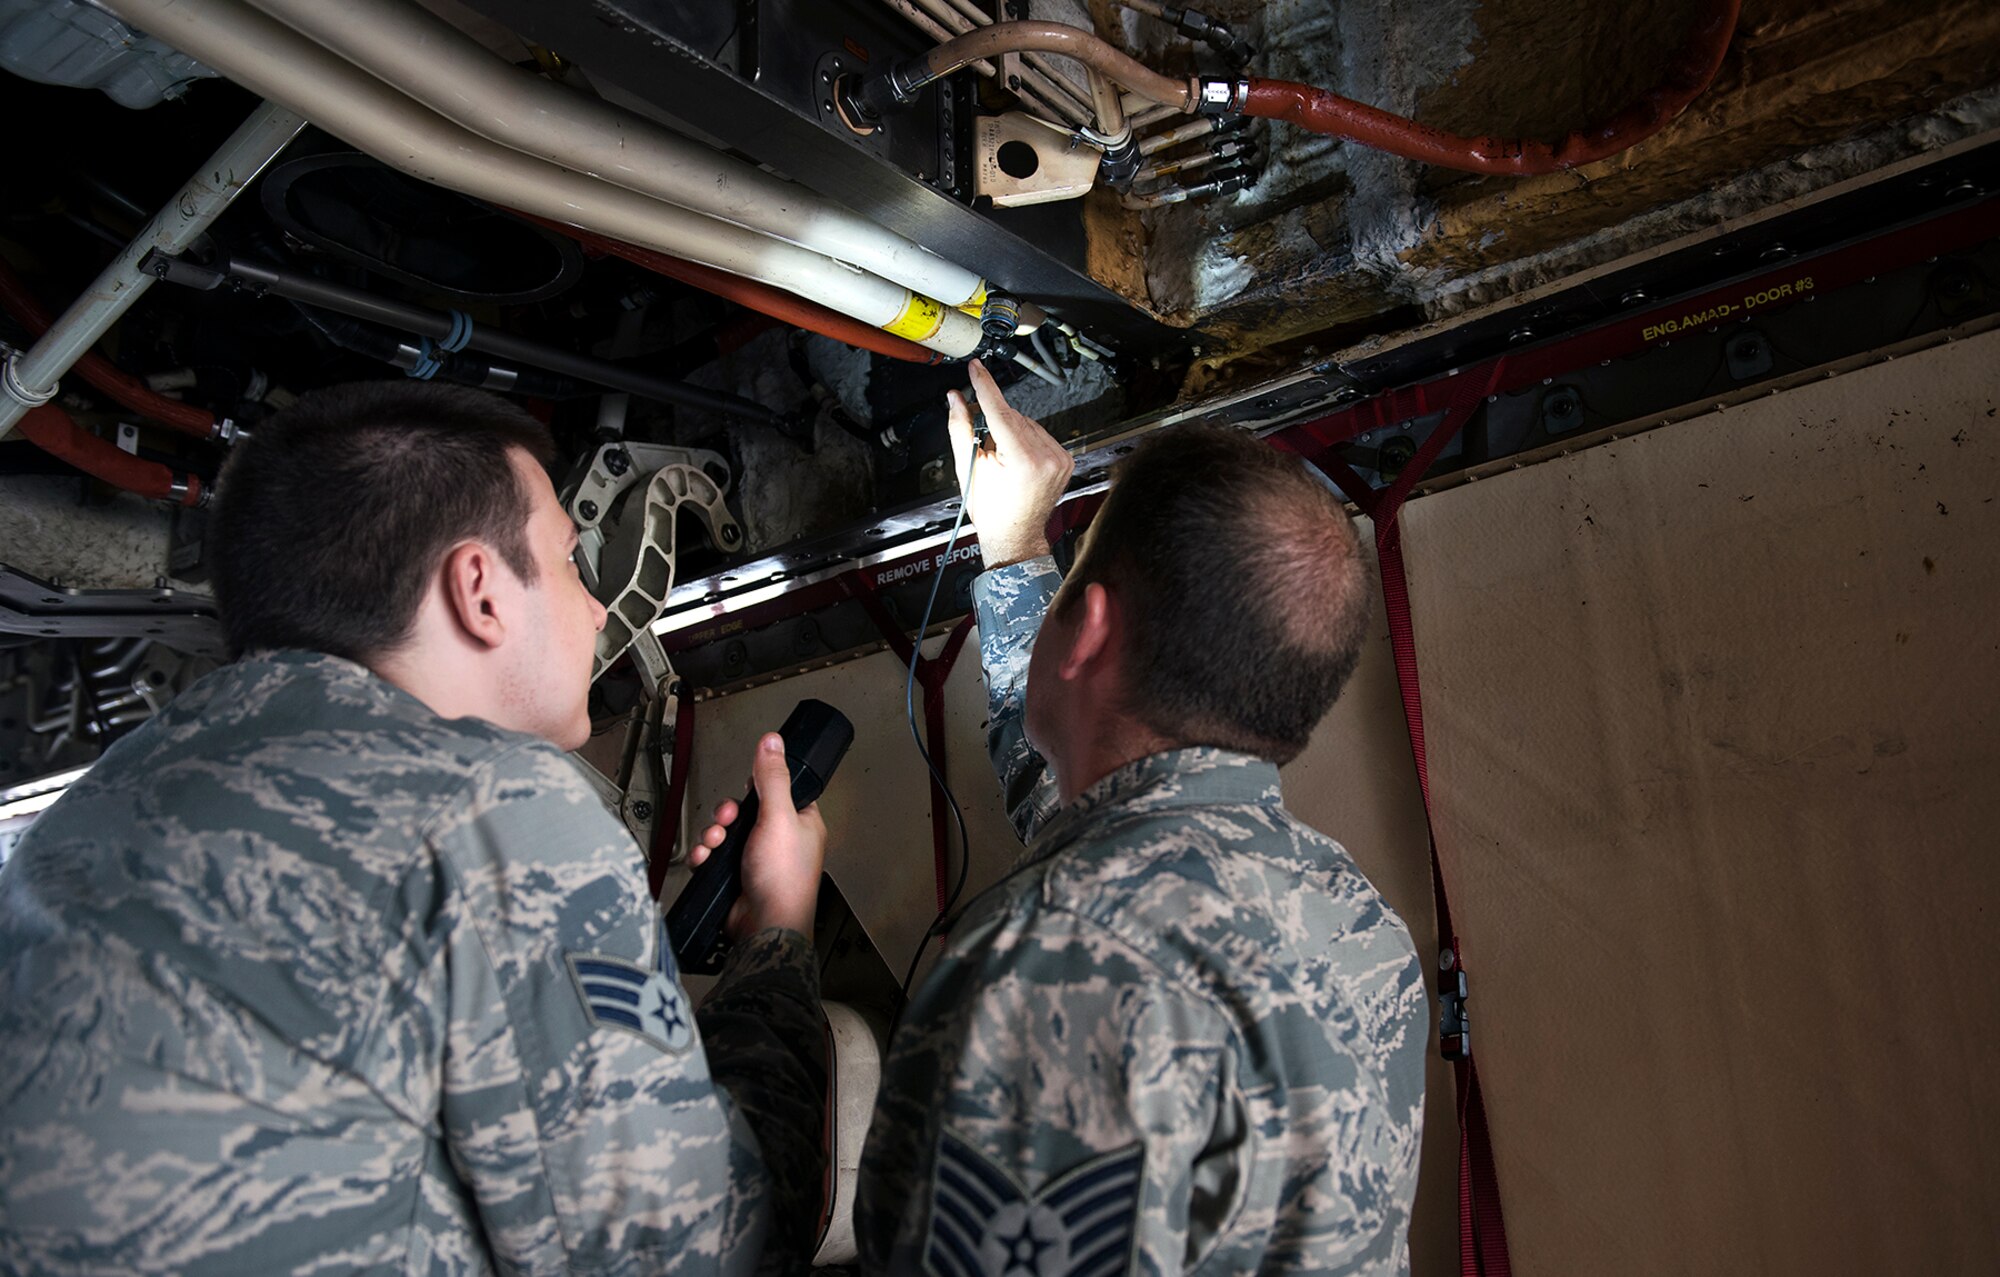 The 509th Aircraft Maintenance Squadron Airmen are the keepers of the B-2 Spirit. From landing gear to the steering system, it takes approximately one year for a member to be certified to perform maintenance on the aircraft. A full inspection of a B-2 typically takes three to four days. Every square inch of the aircraft is carefully scrutinized to ensure maximum combat readiness and a deployable force capable of projecting global firepower at a moment's notice, anytime and anywhere.